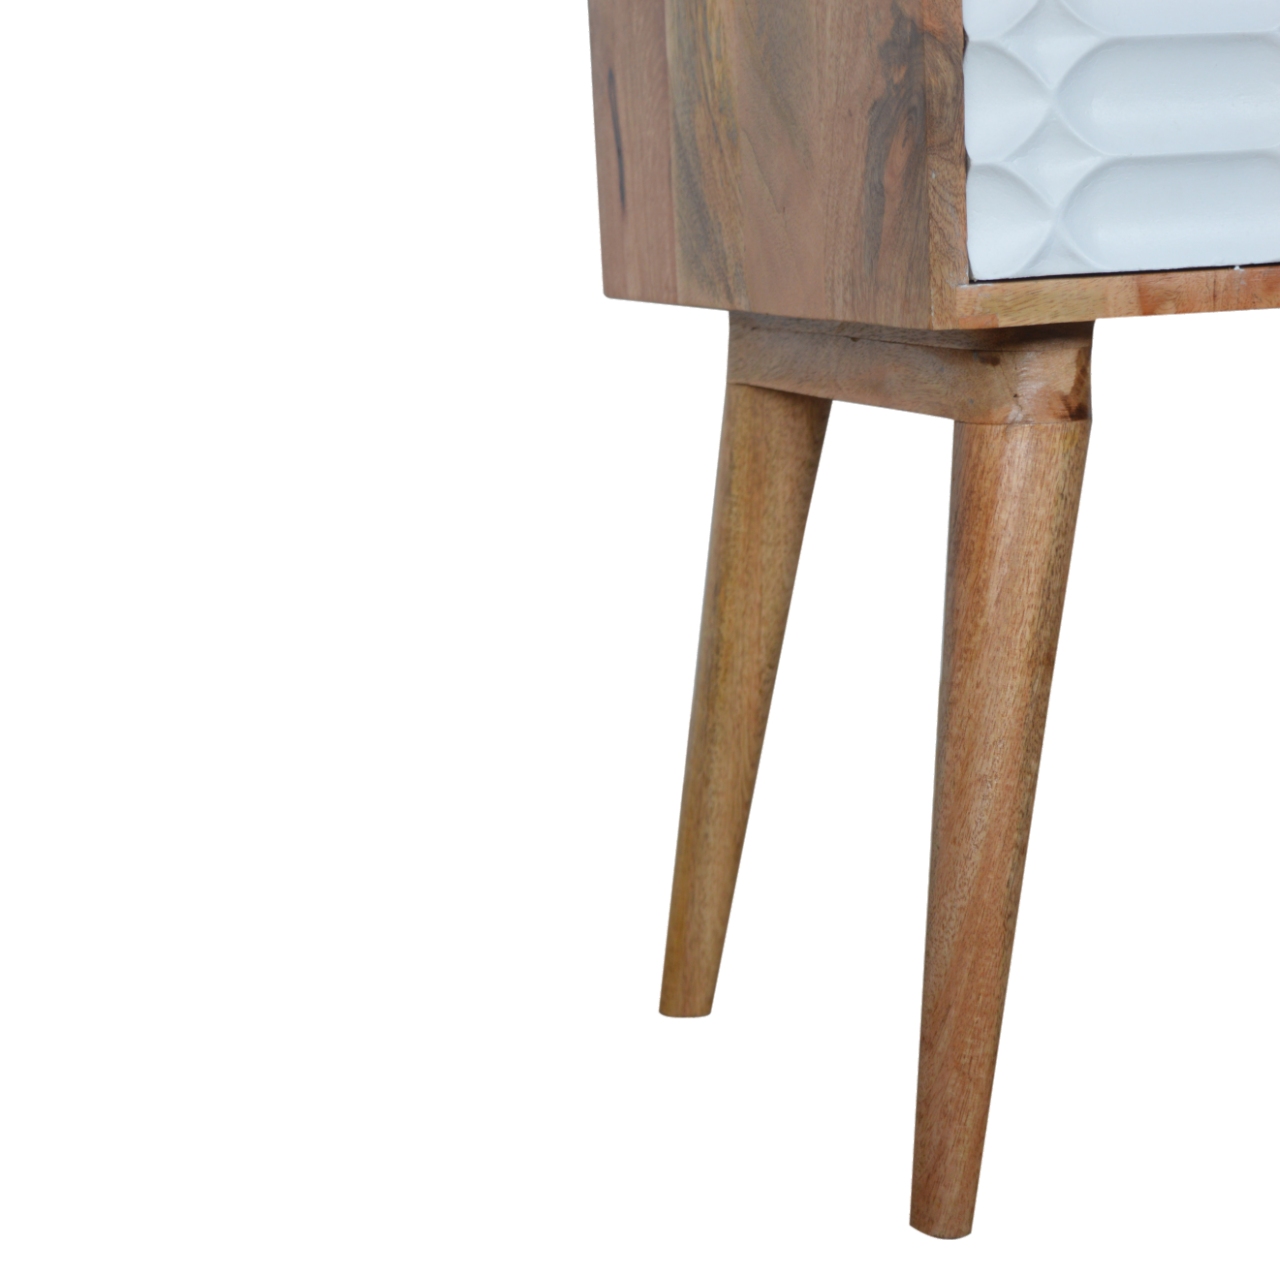 Details about   Artisan Furniture Solid Mango Wood Capsule Carved Bedside Nightstand Cabinet 